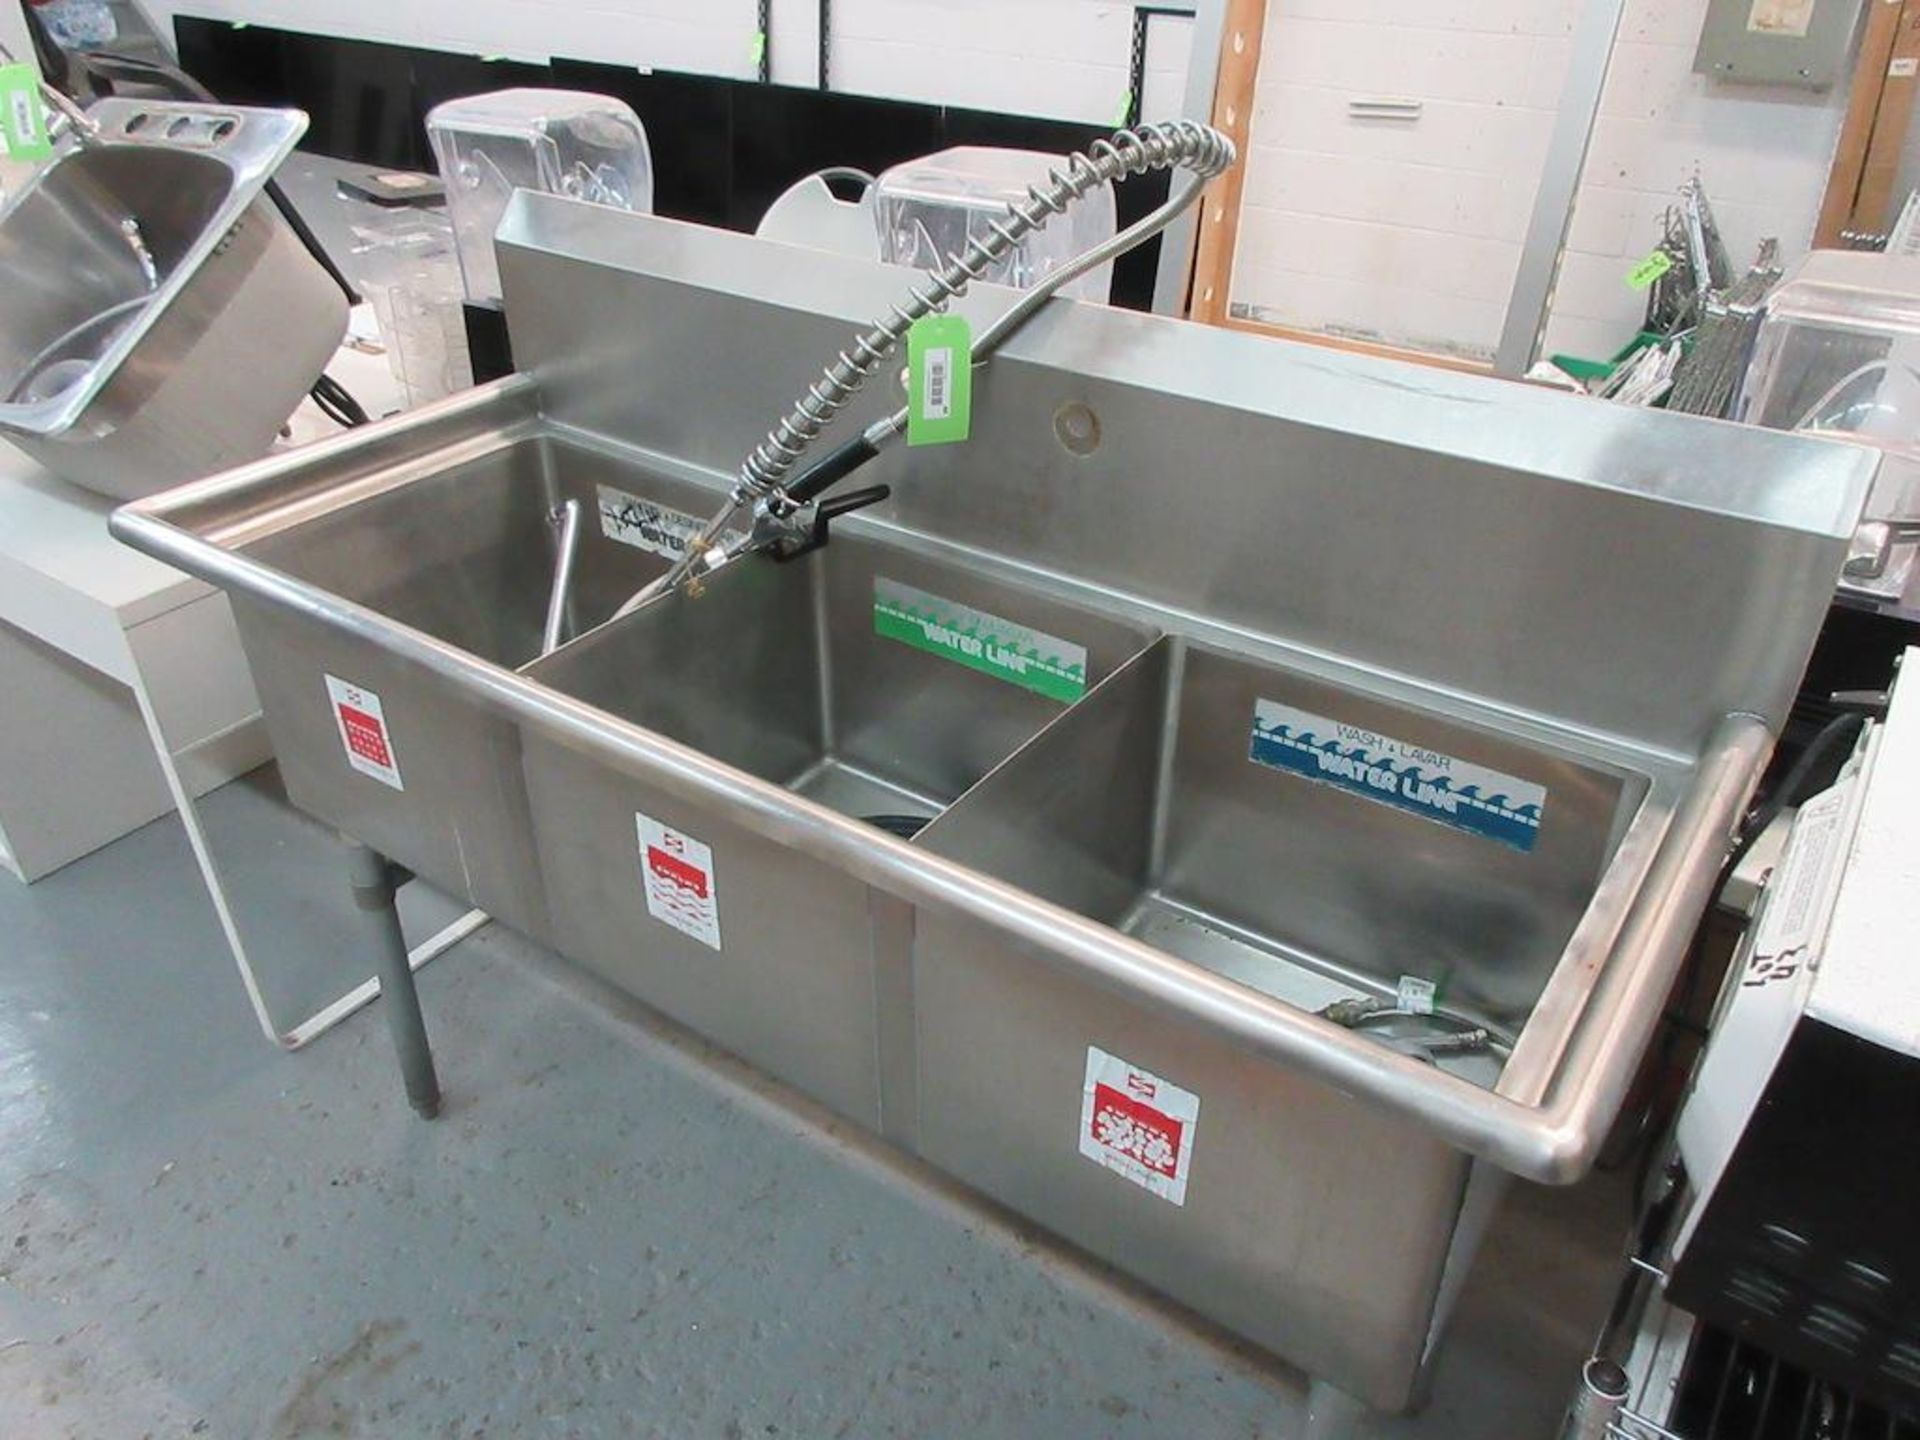 Stainless Steel 59" 3 compartment sink w water filter - Image 2 of 3